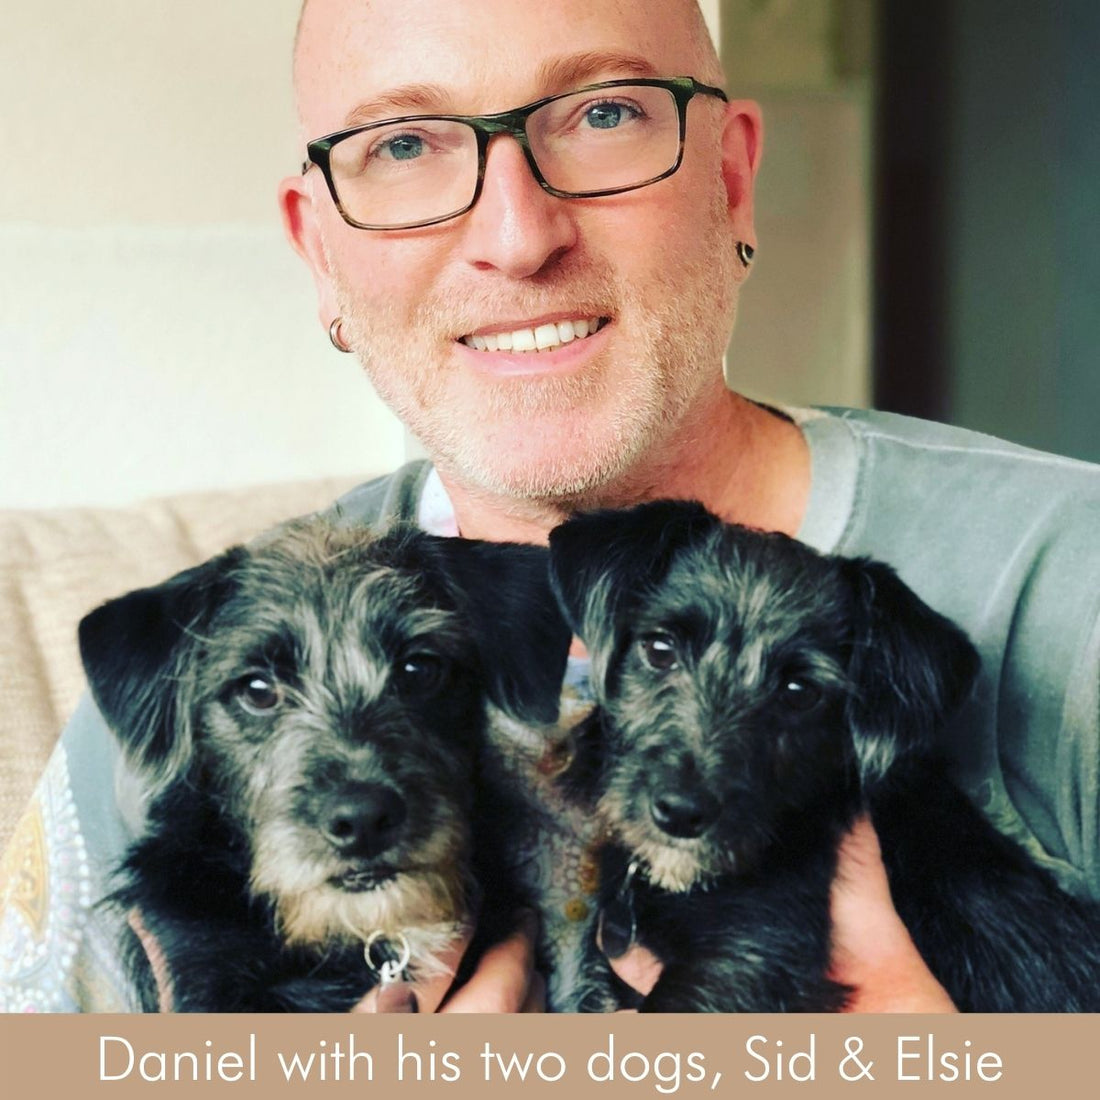 Daniel with his two dogs, Sid & Elsie - Against Animal Testing